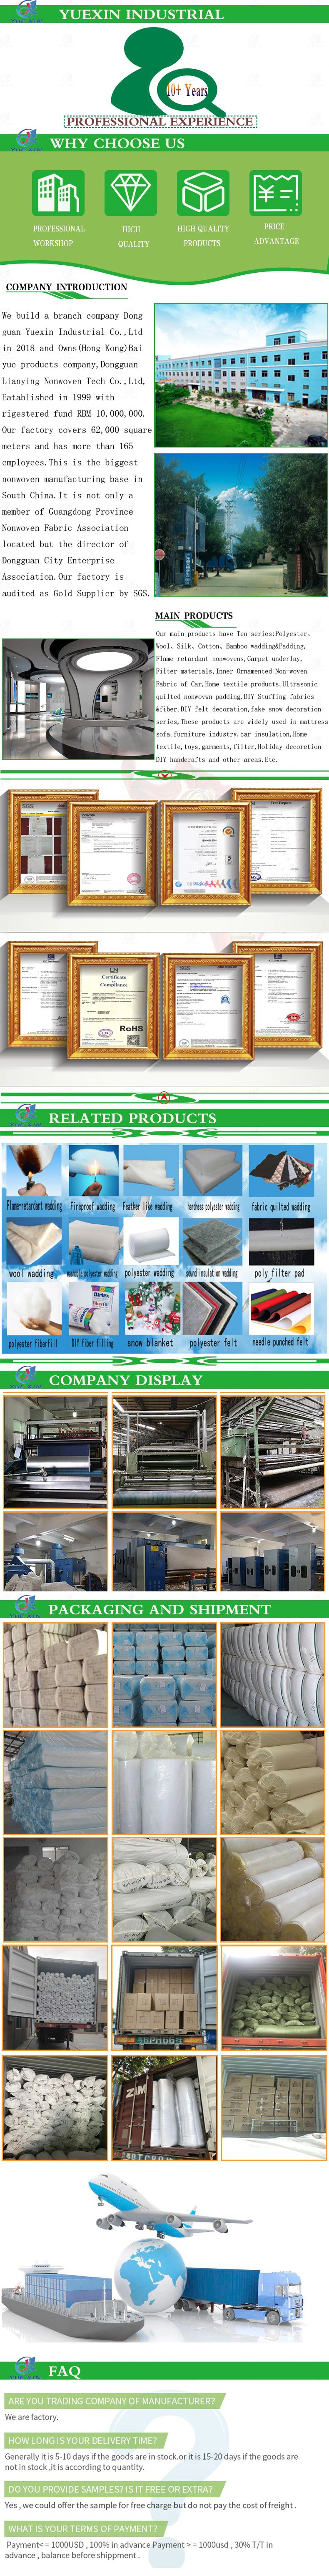 100% Polyester Insulation Batts for Wall Insulation